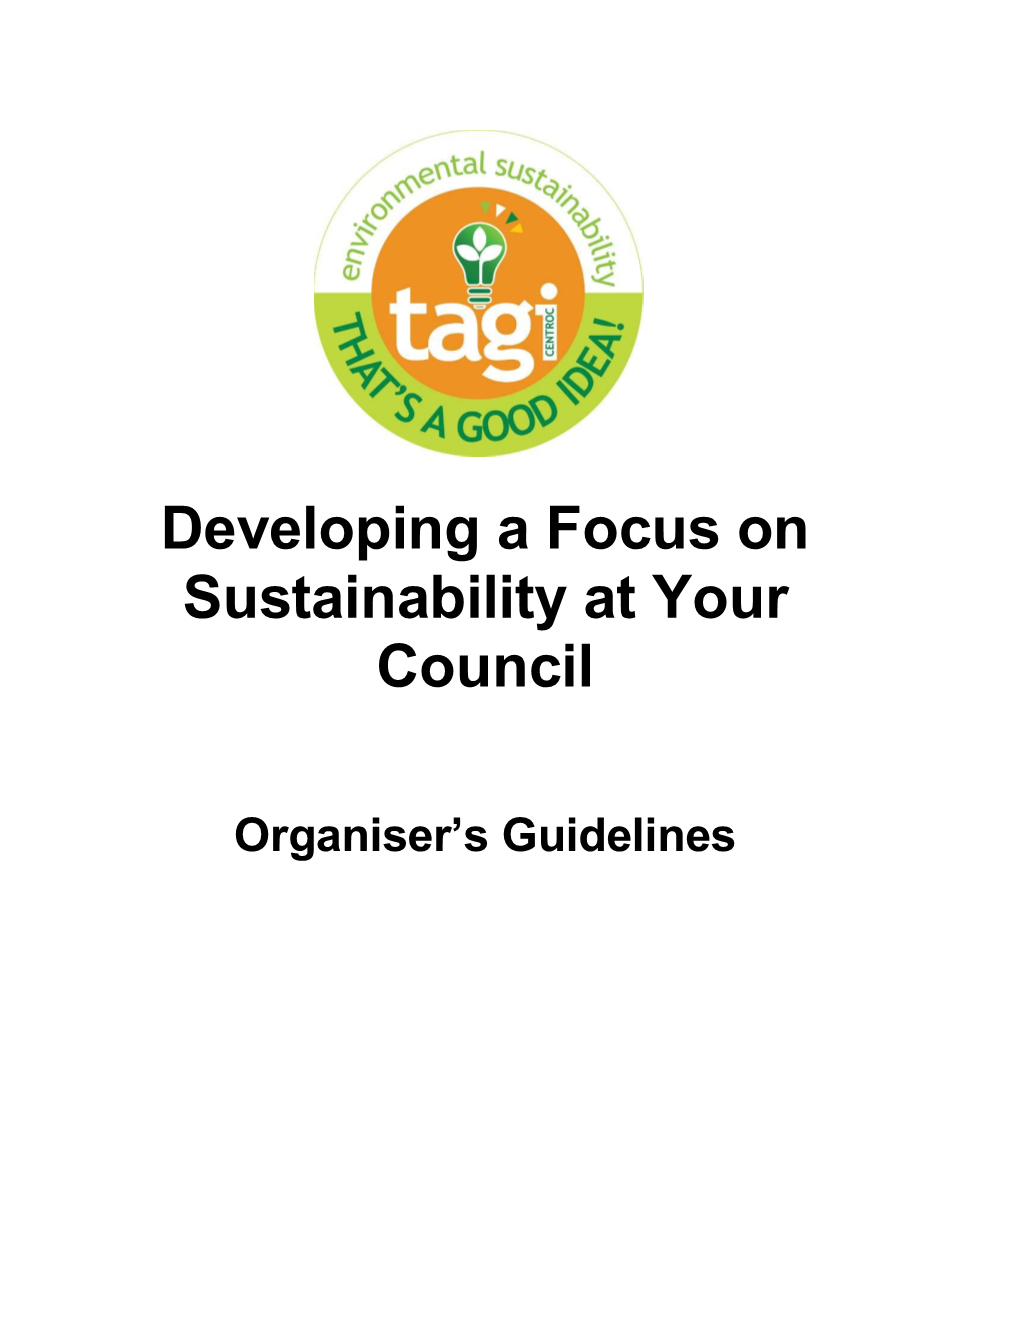 Developing a Focus on Sustainability at Your Council